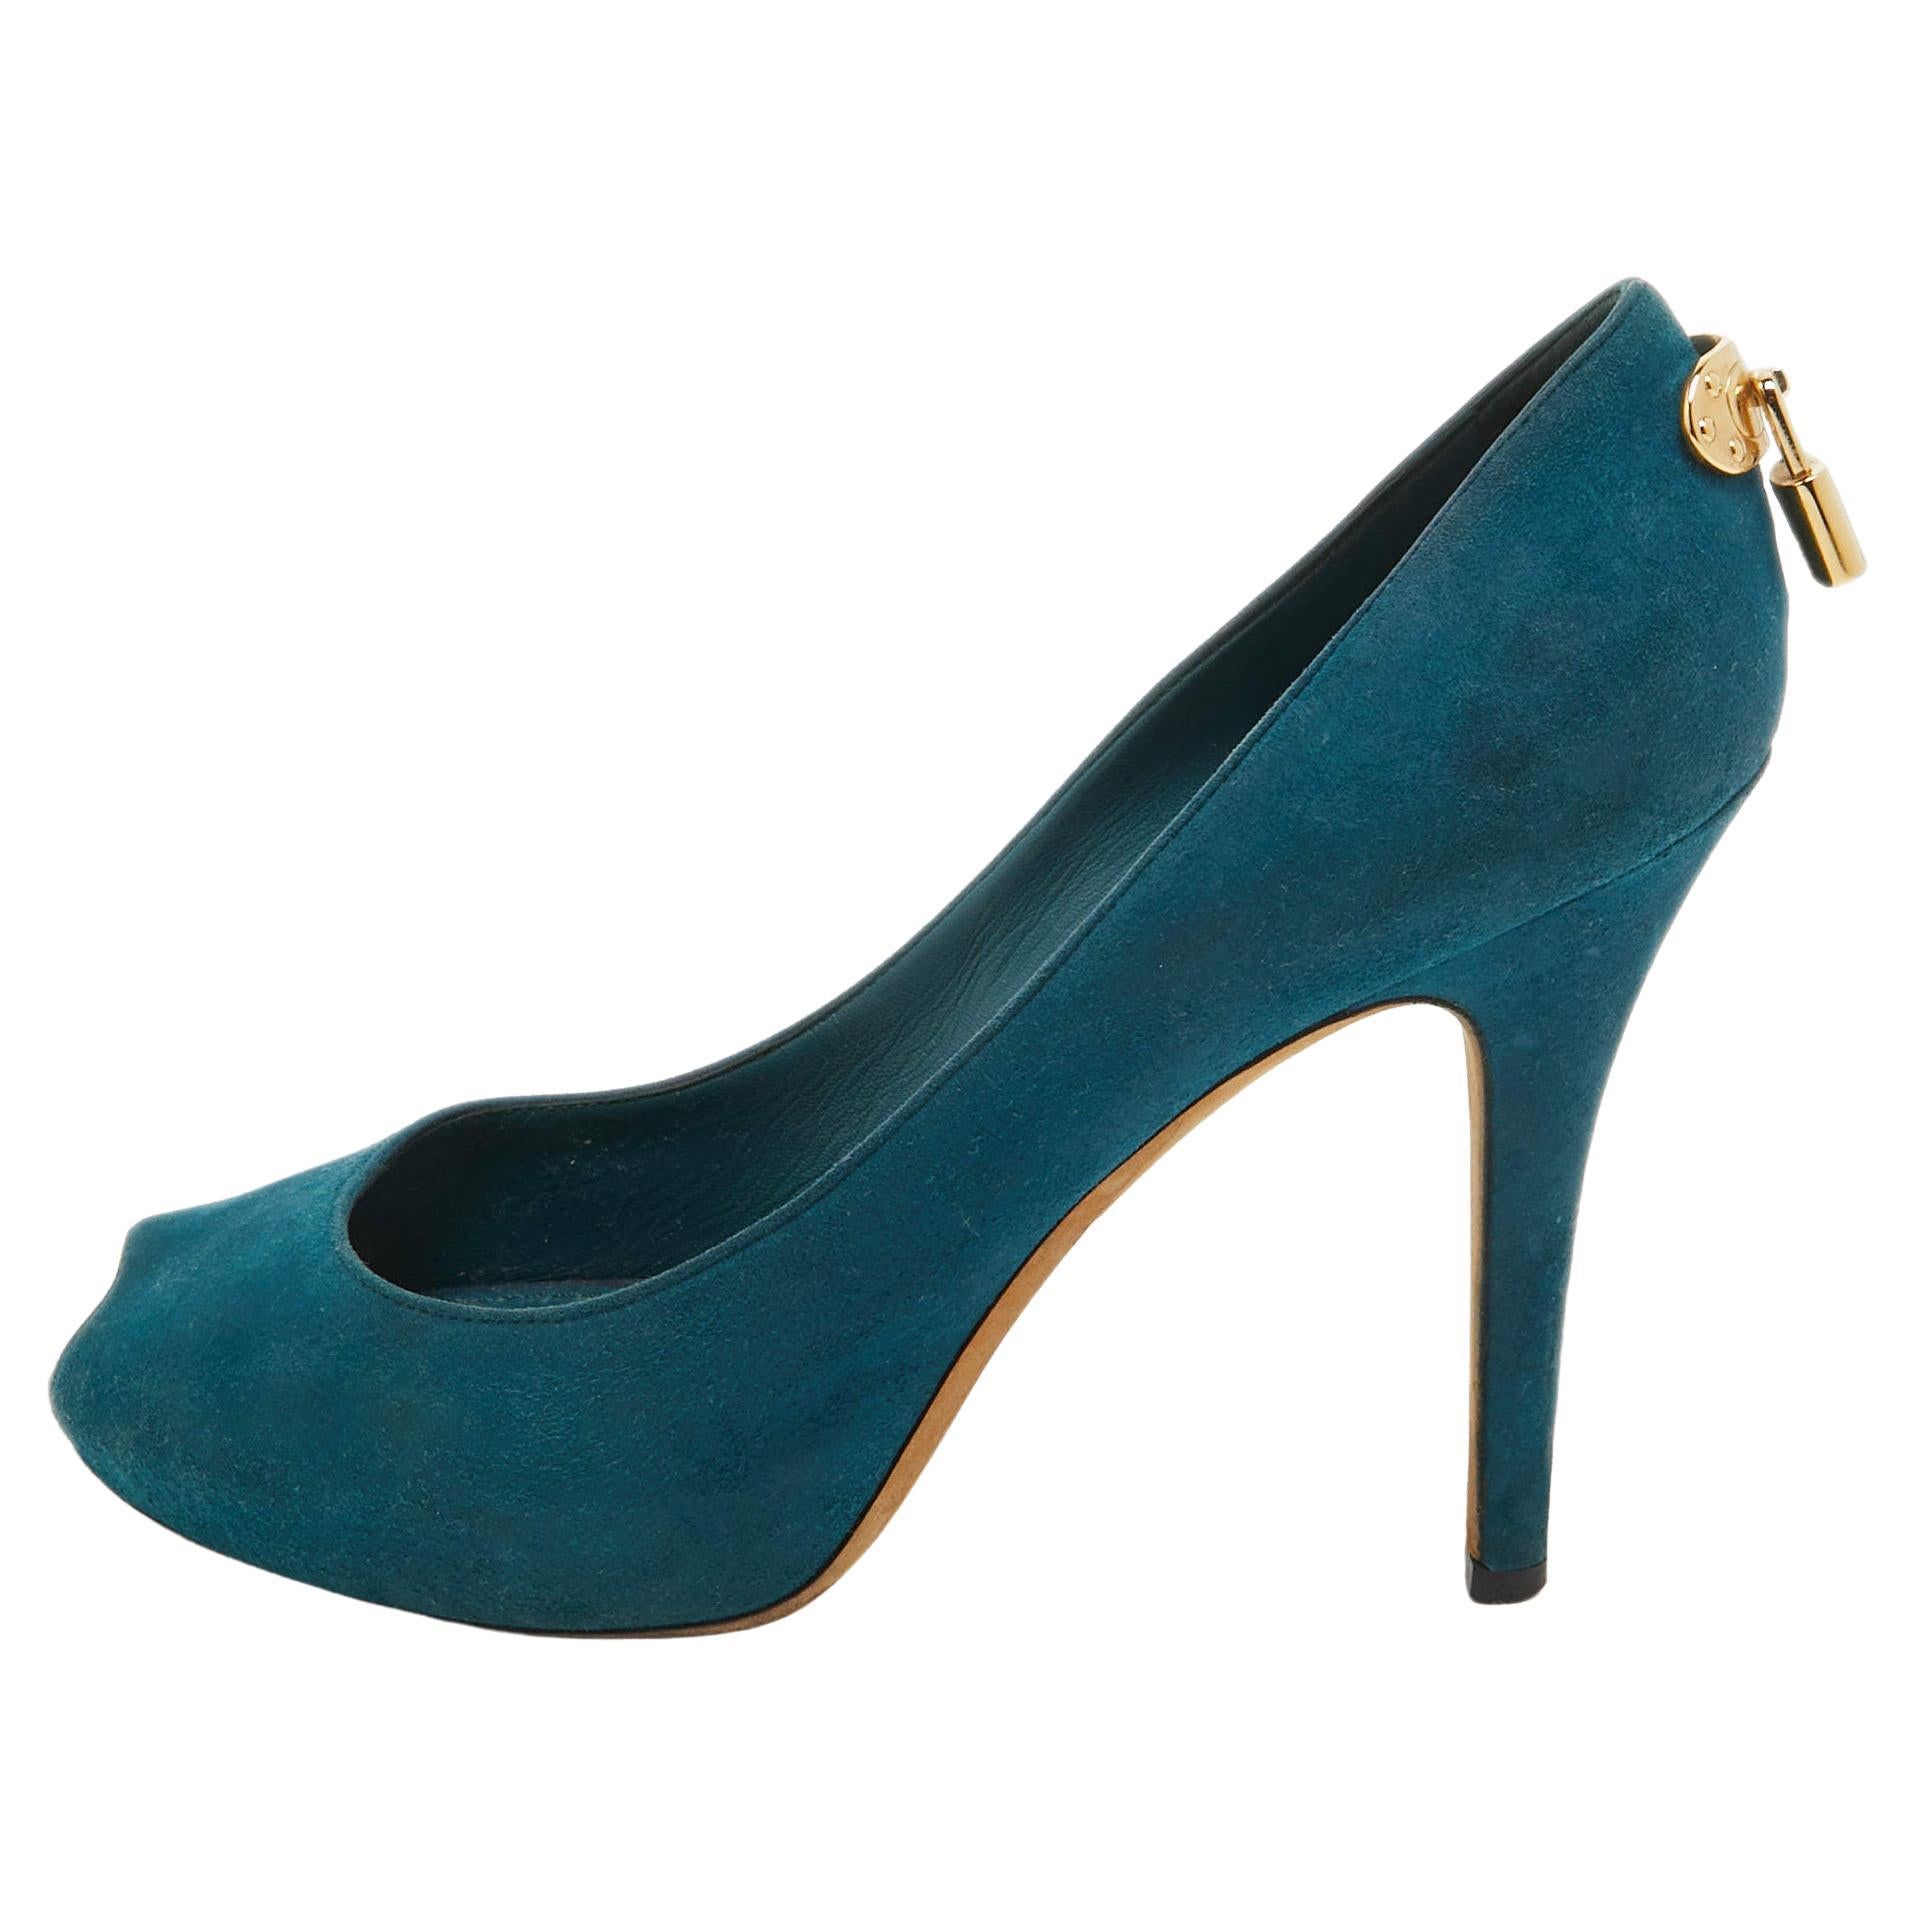 Louis Vuitton Teal Suede Oh Really! Peep Toe Pumps Size 38.5 For Sale